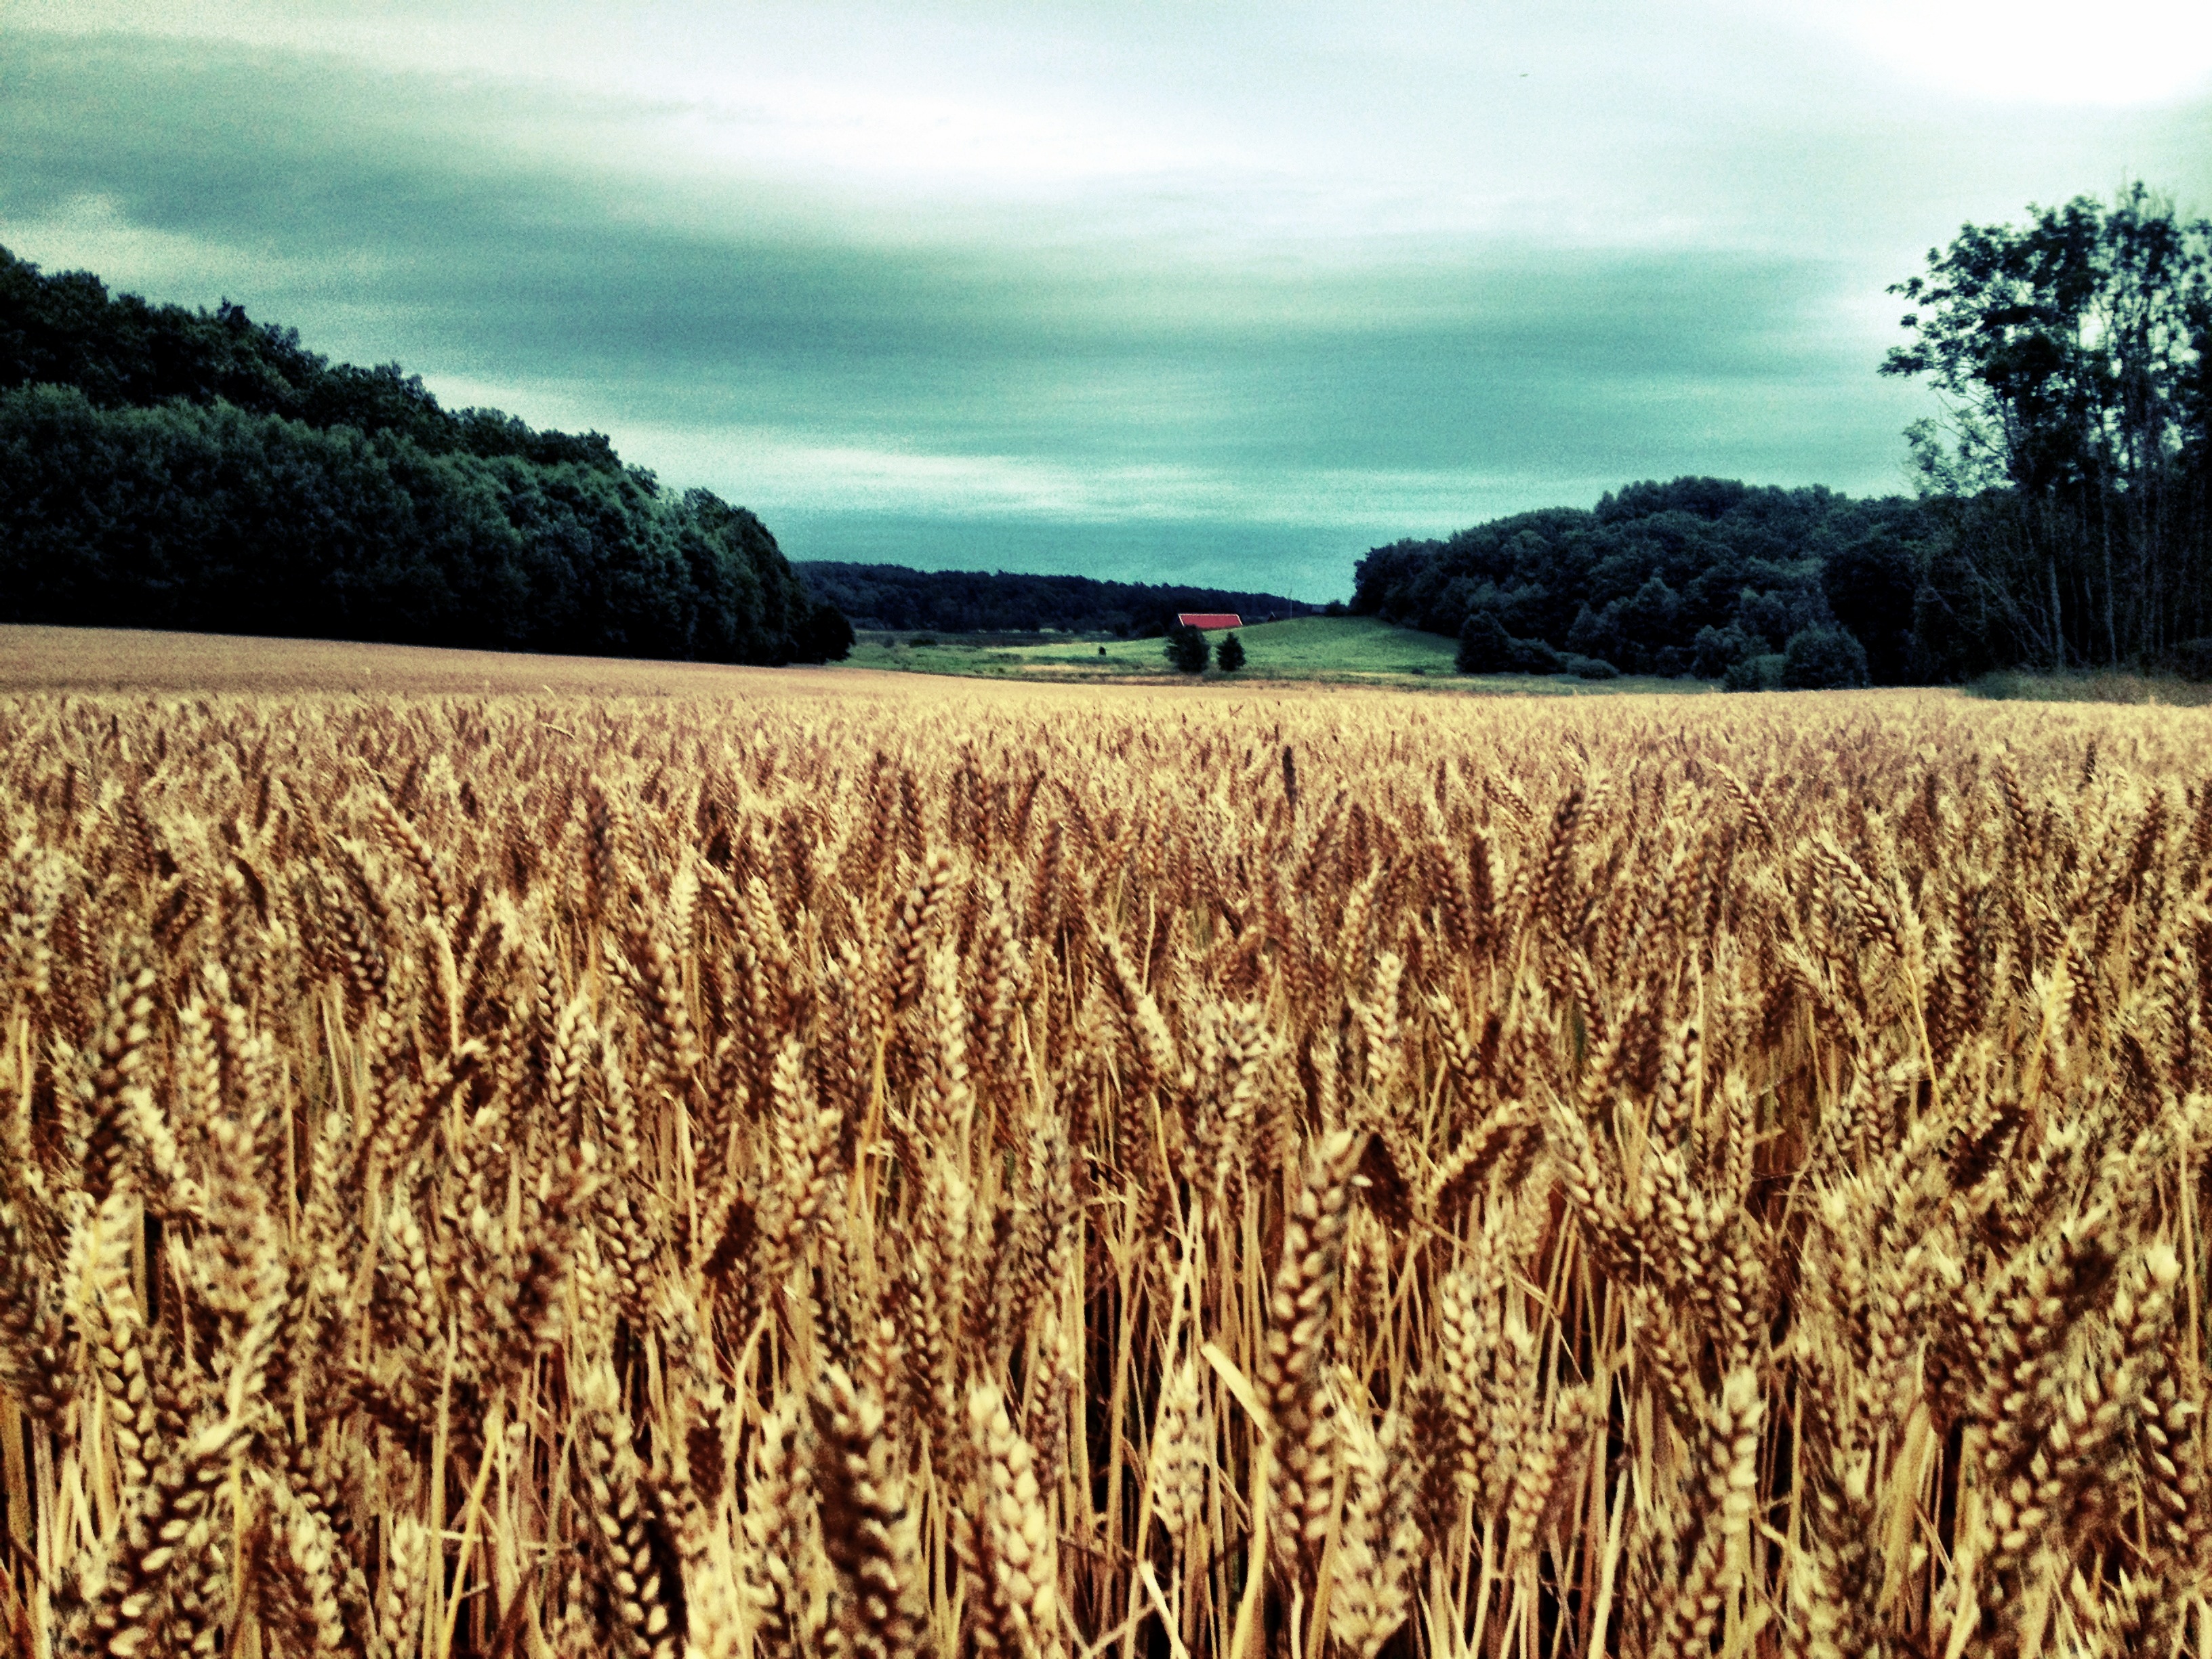 iPhone Trip to Karlskrona & the Swedish Countryside